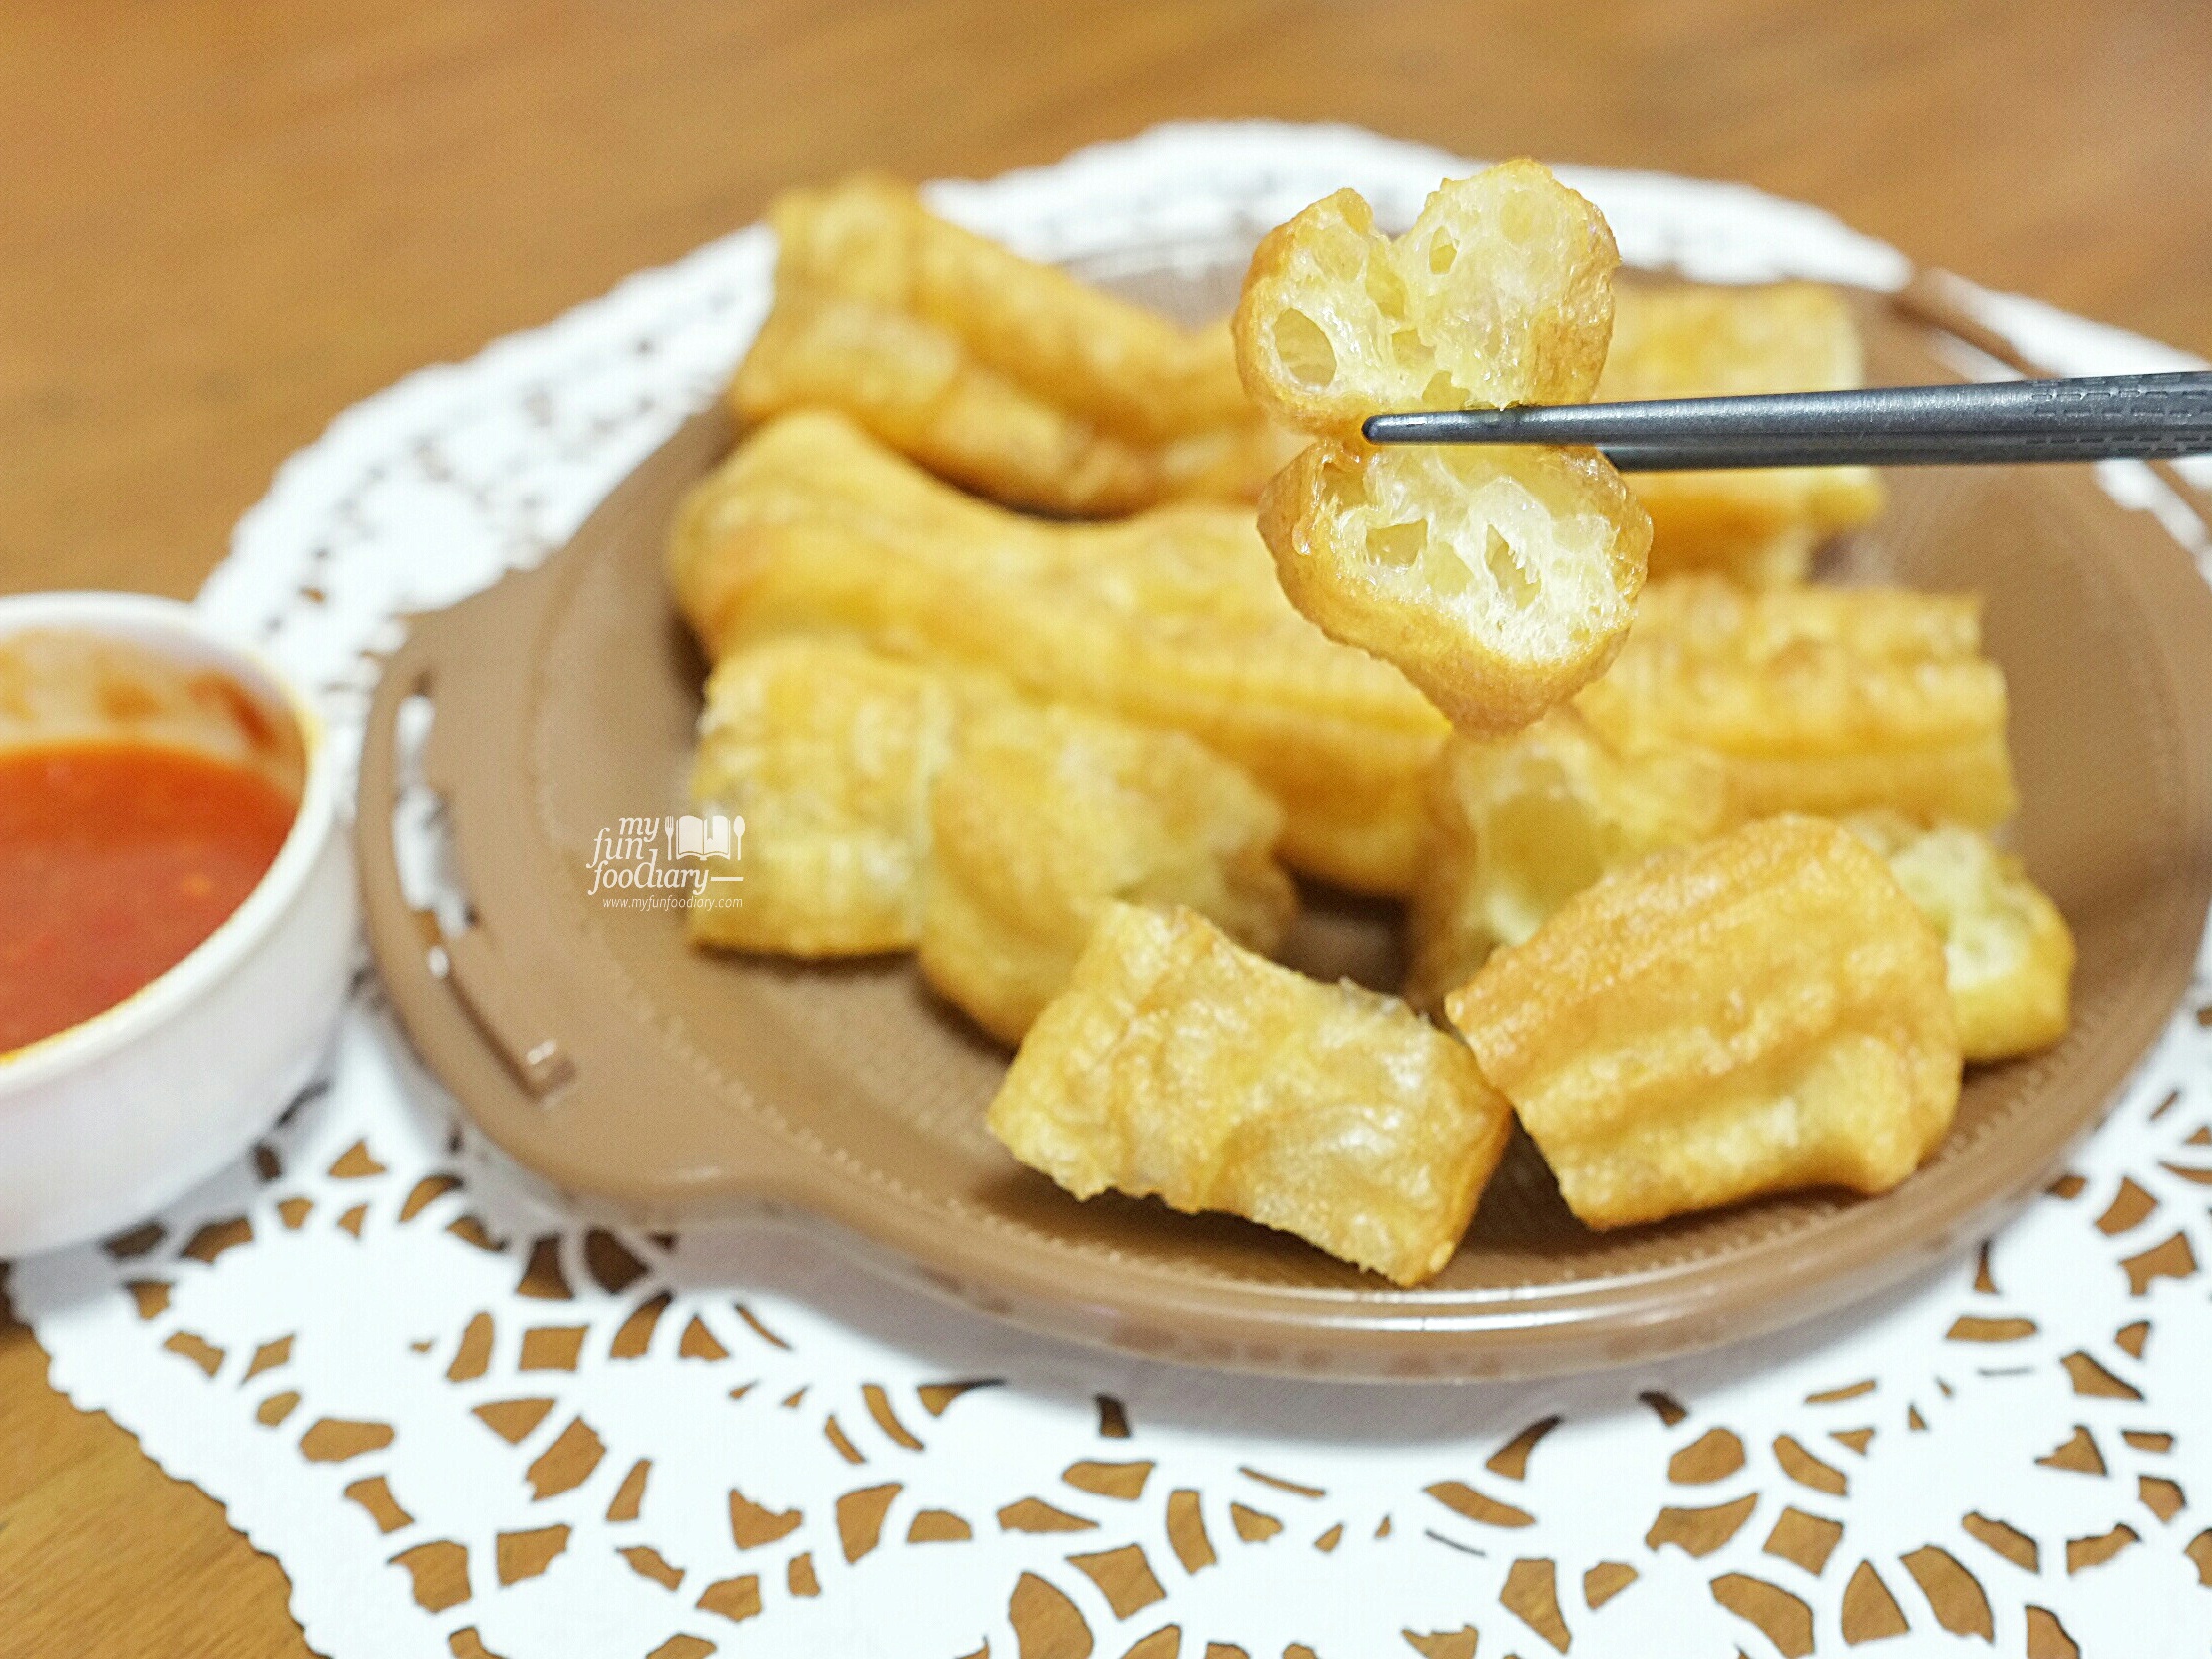 Fried Cakwe at home